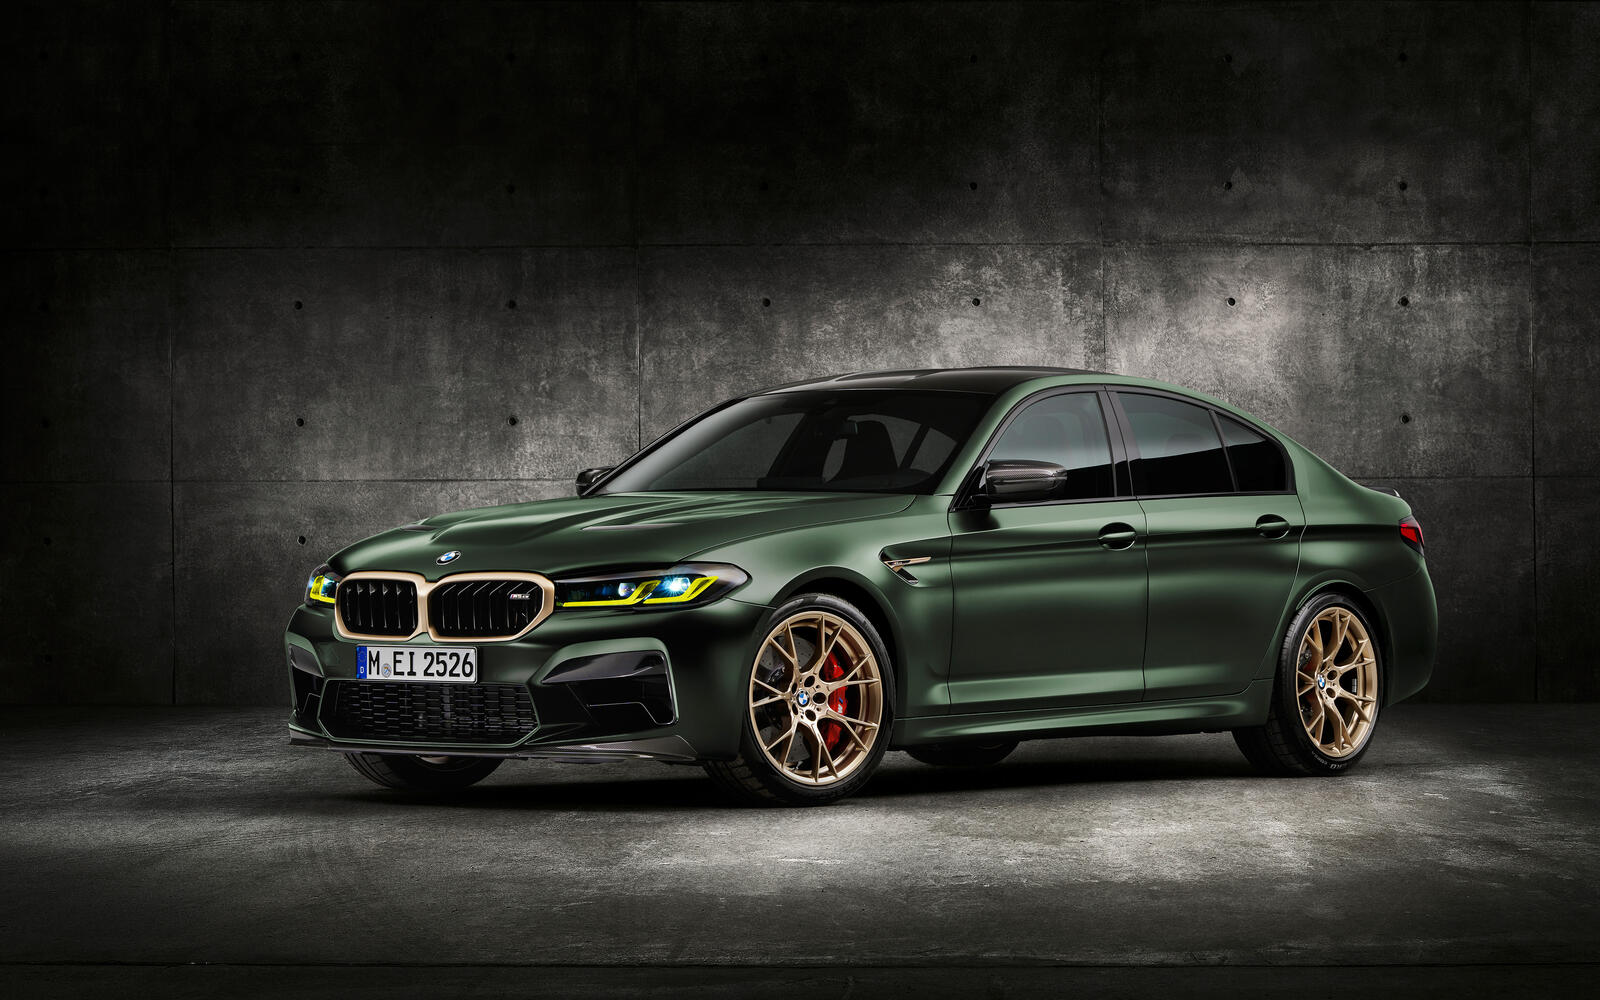 Free photo A green BMW M5 on gold rims.